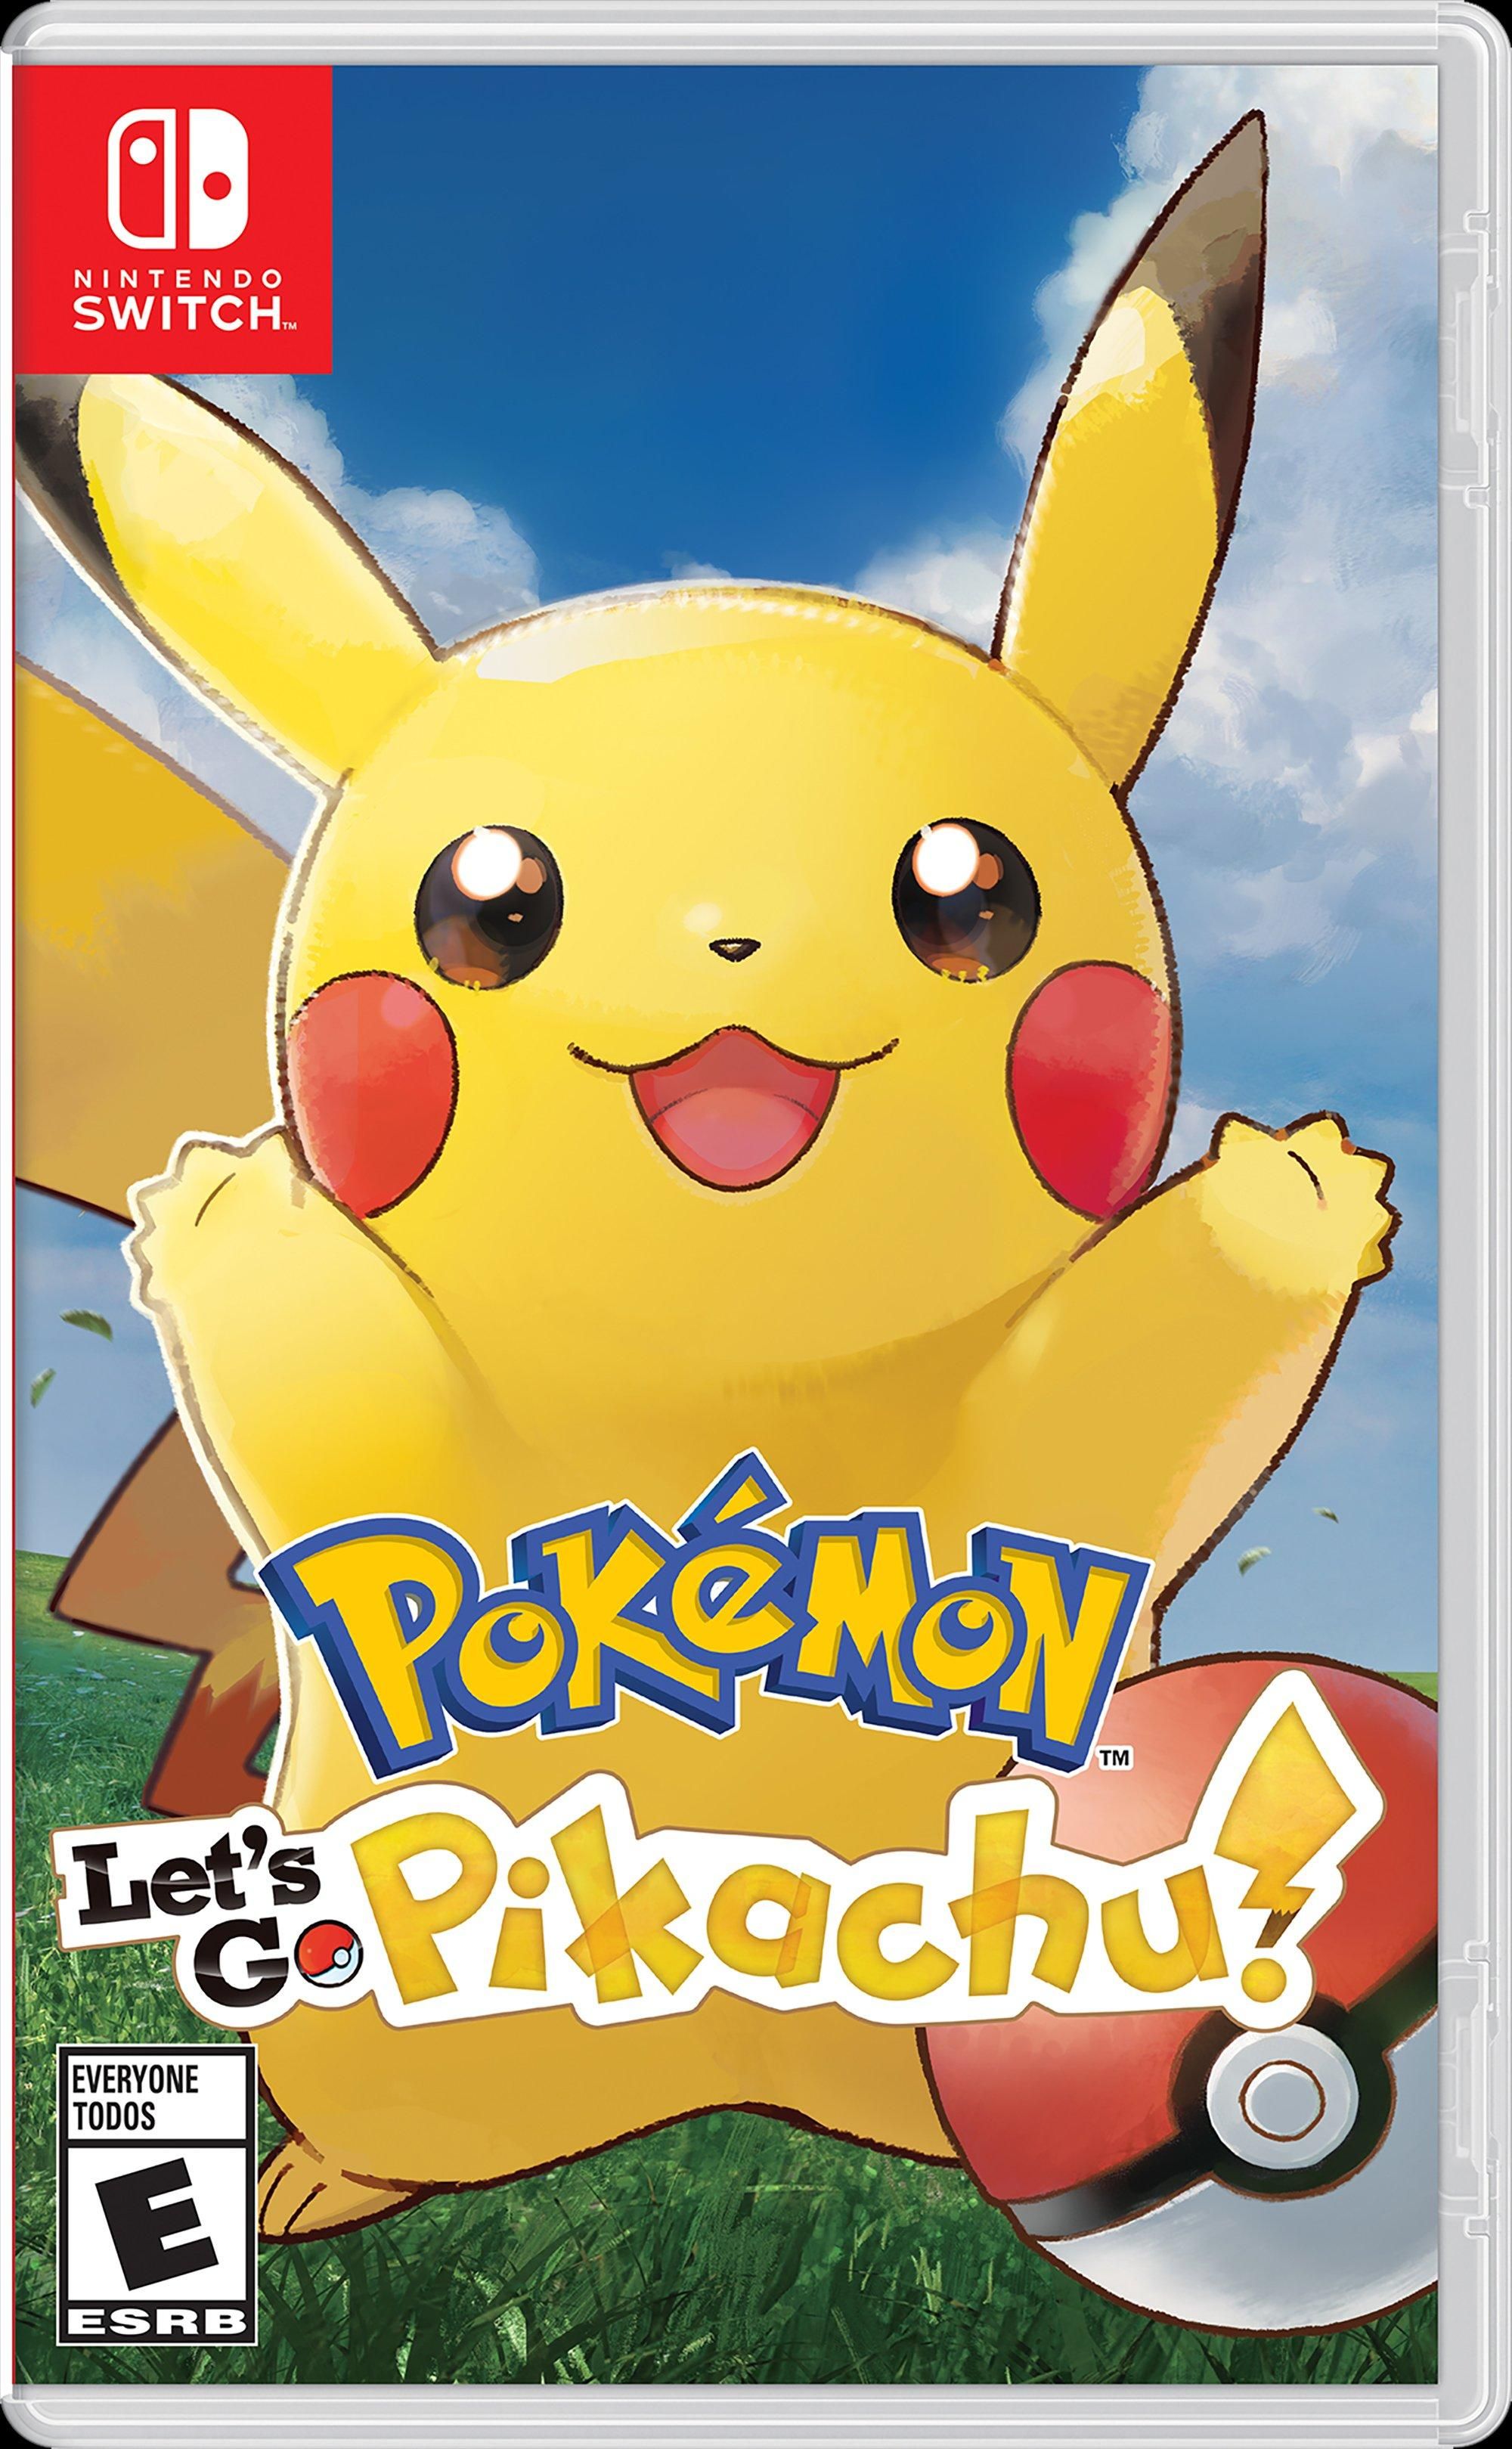 Pikachu Looks Happy on the Let's Go, Pikachu! Cover